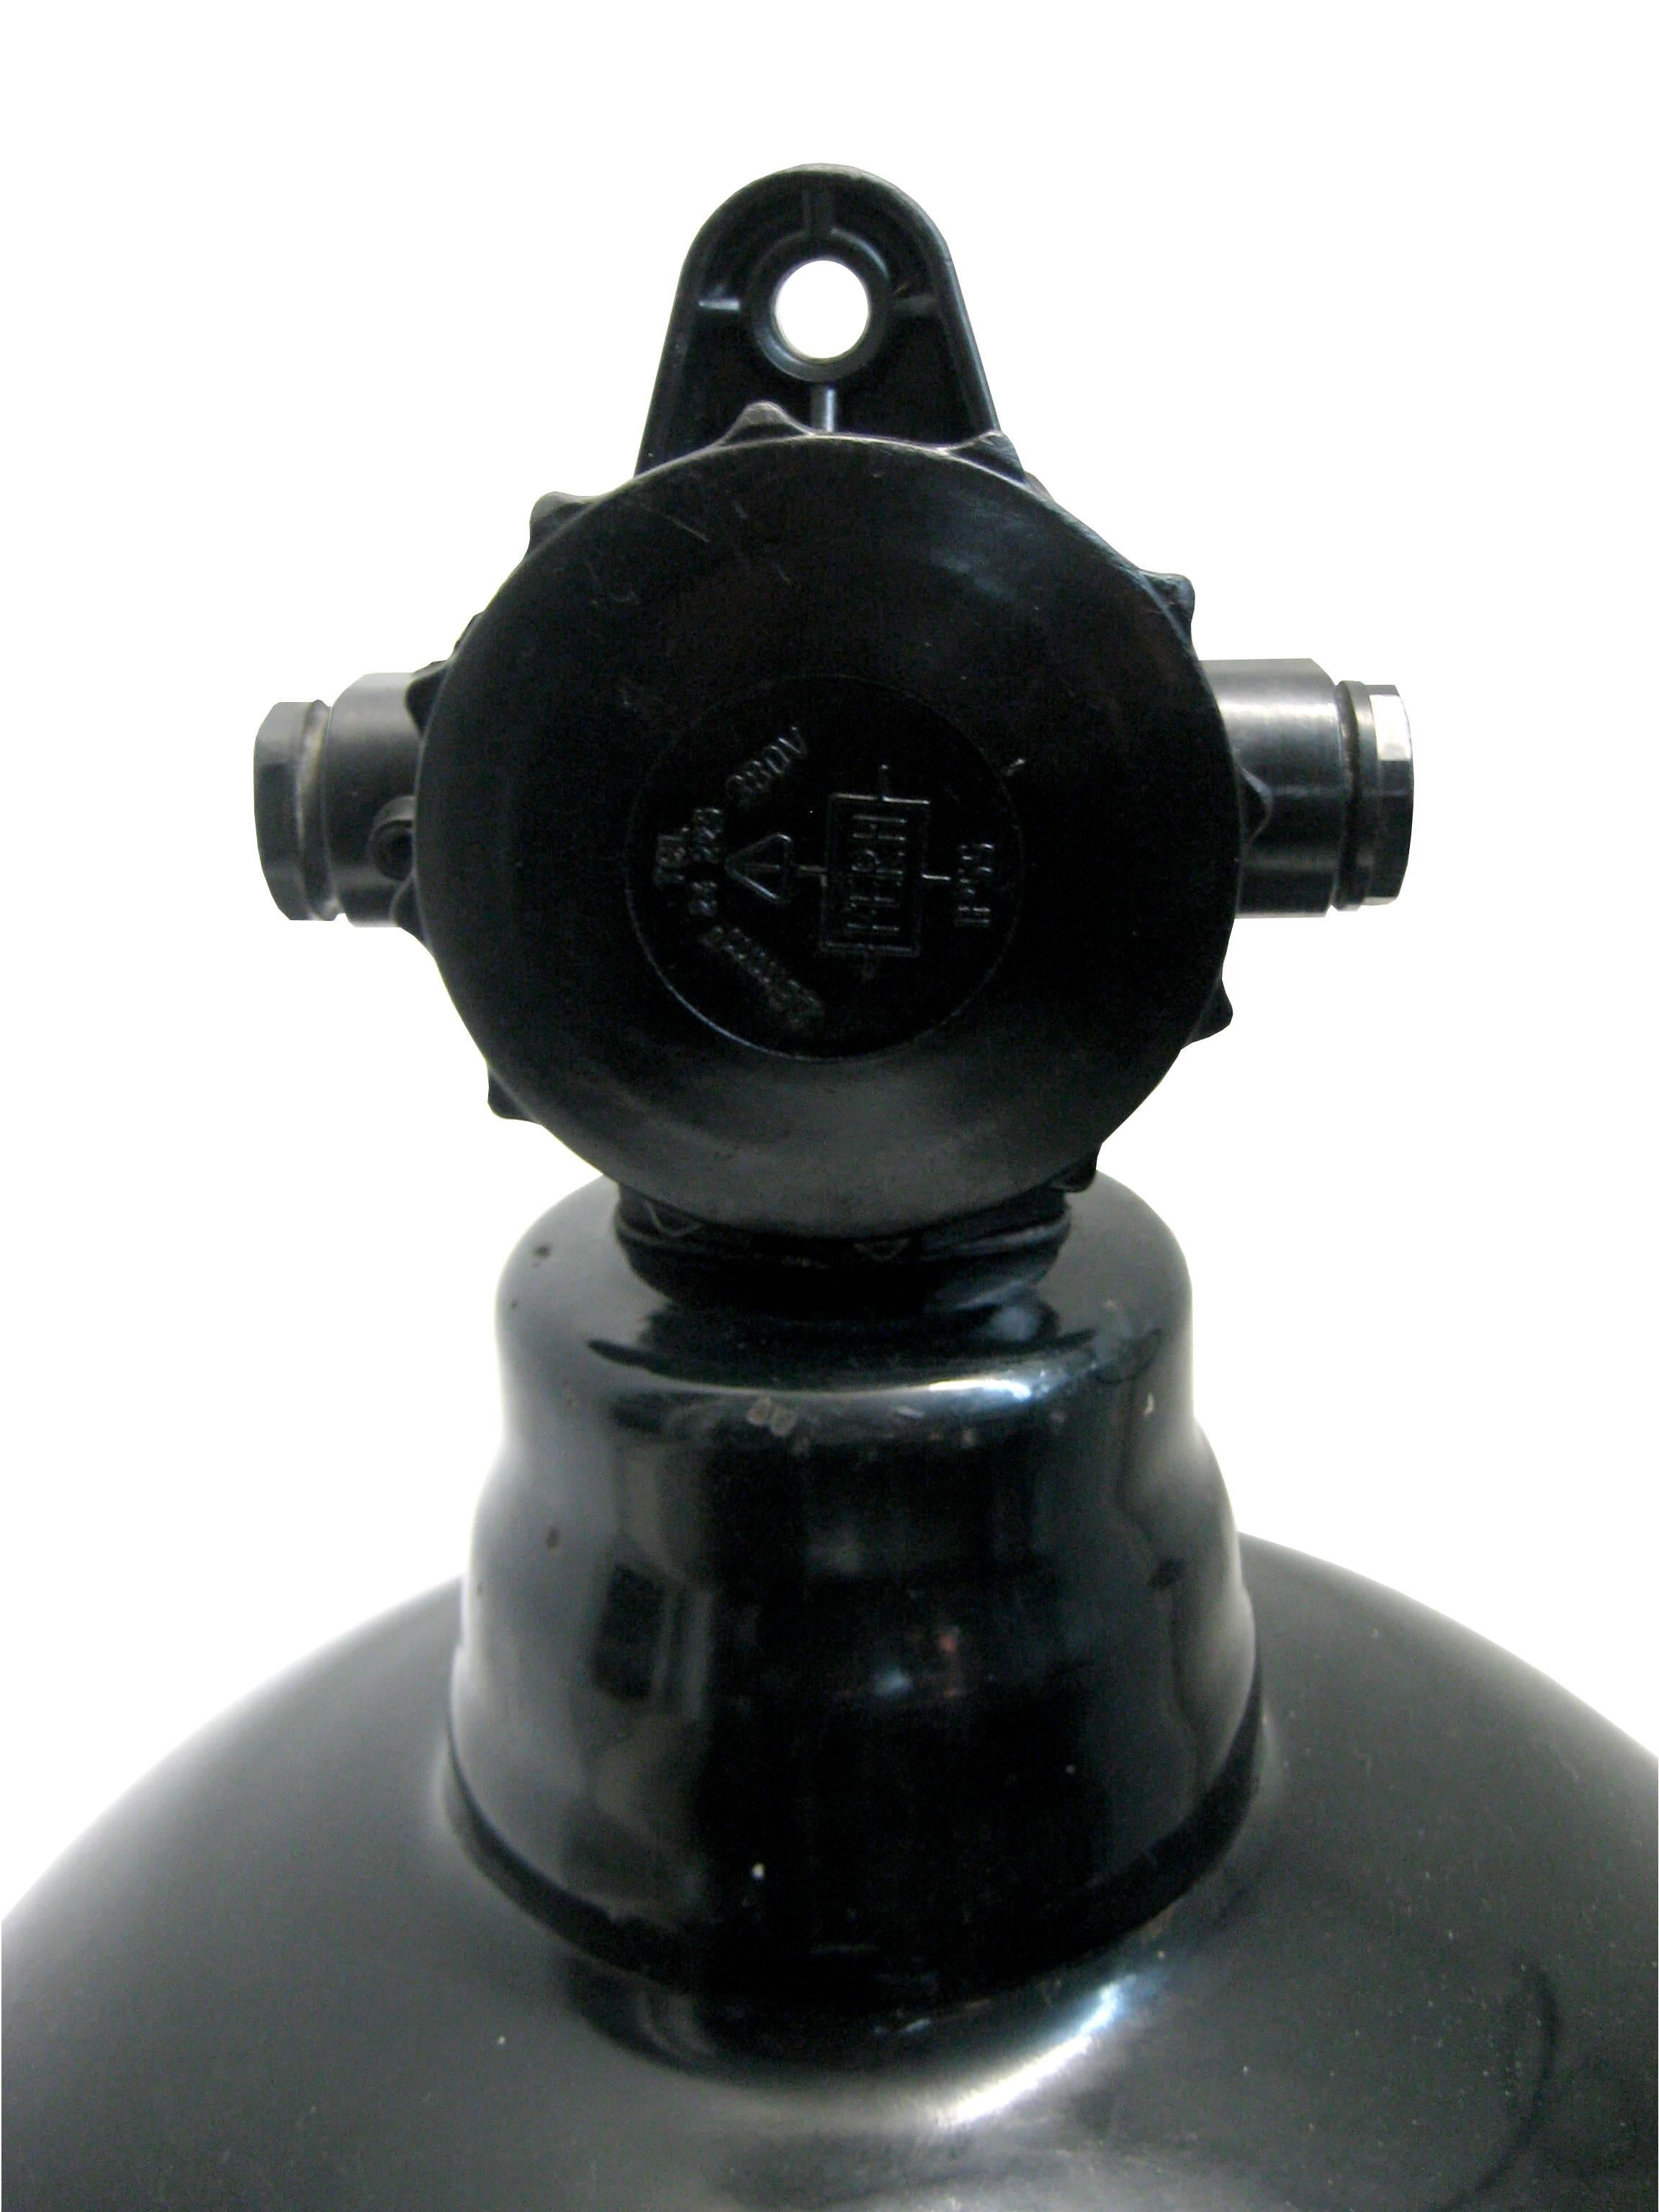 The German industrial classic! Used in warehouses and factories in Germany. Black enamel top with Bakelite top.

Weight: 2.2 kg / 4.9 lb

Priced per individual item. All lamps have been made suitable by international standards for incandescent light